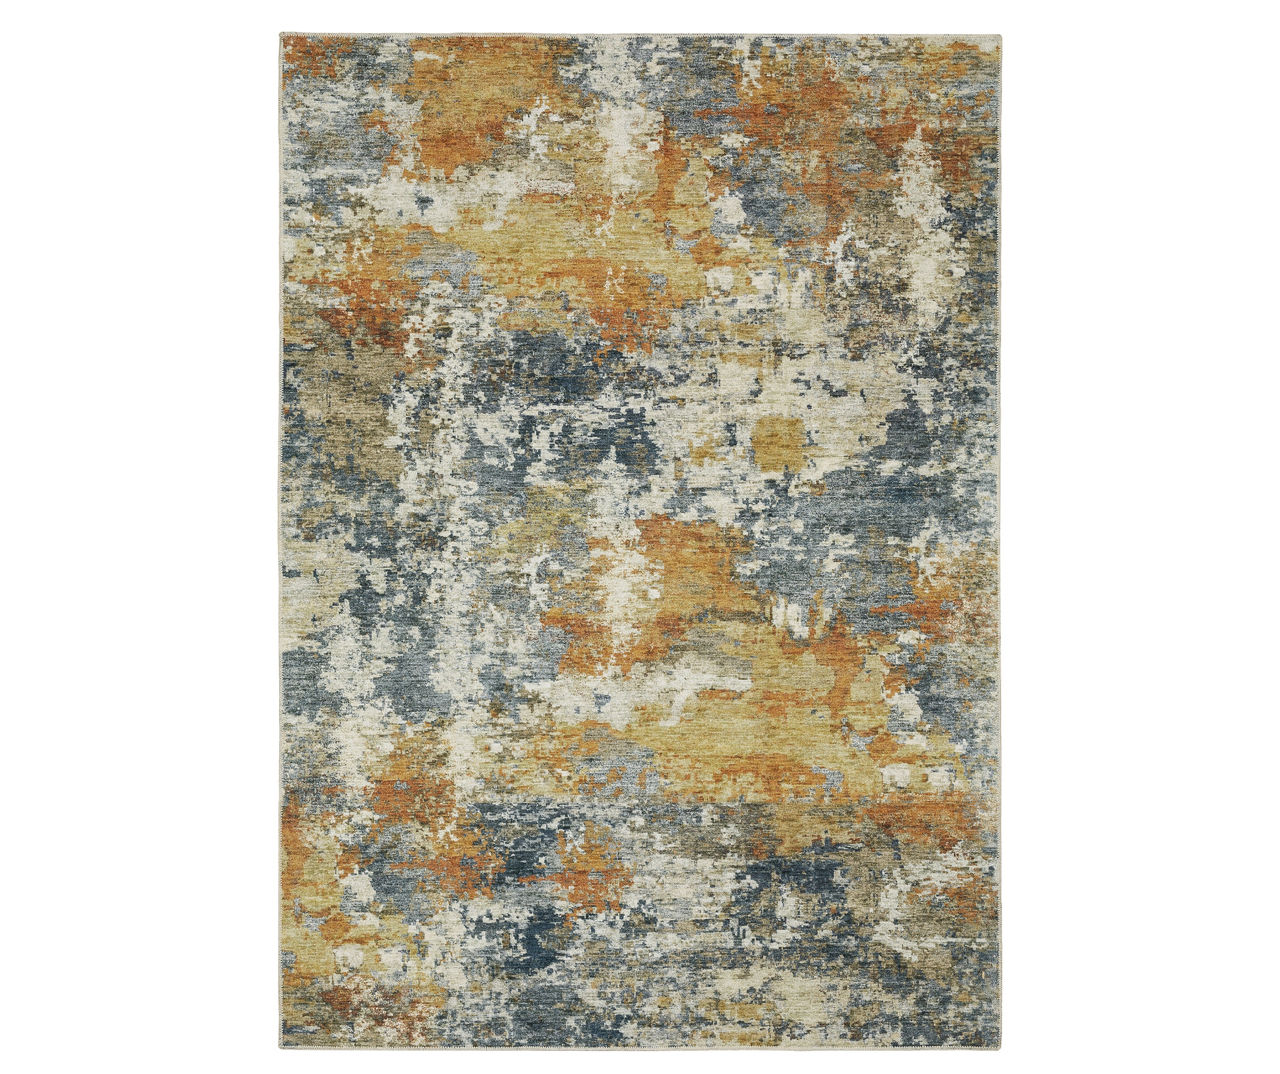 Malay Blue & Gold Abstract Area Rug, (7.6' x 10')